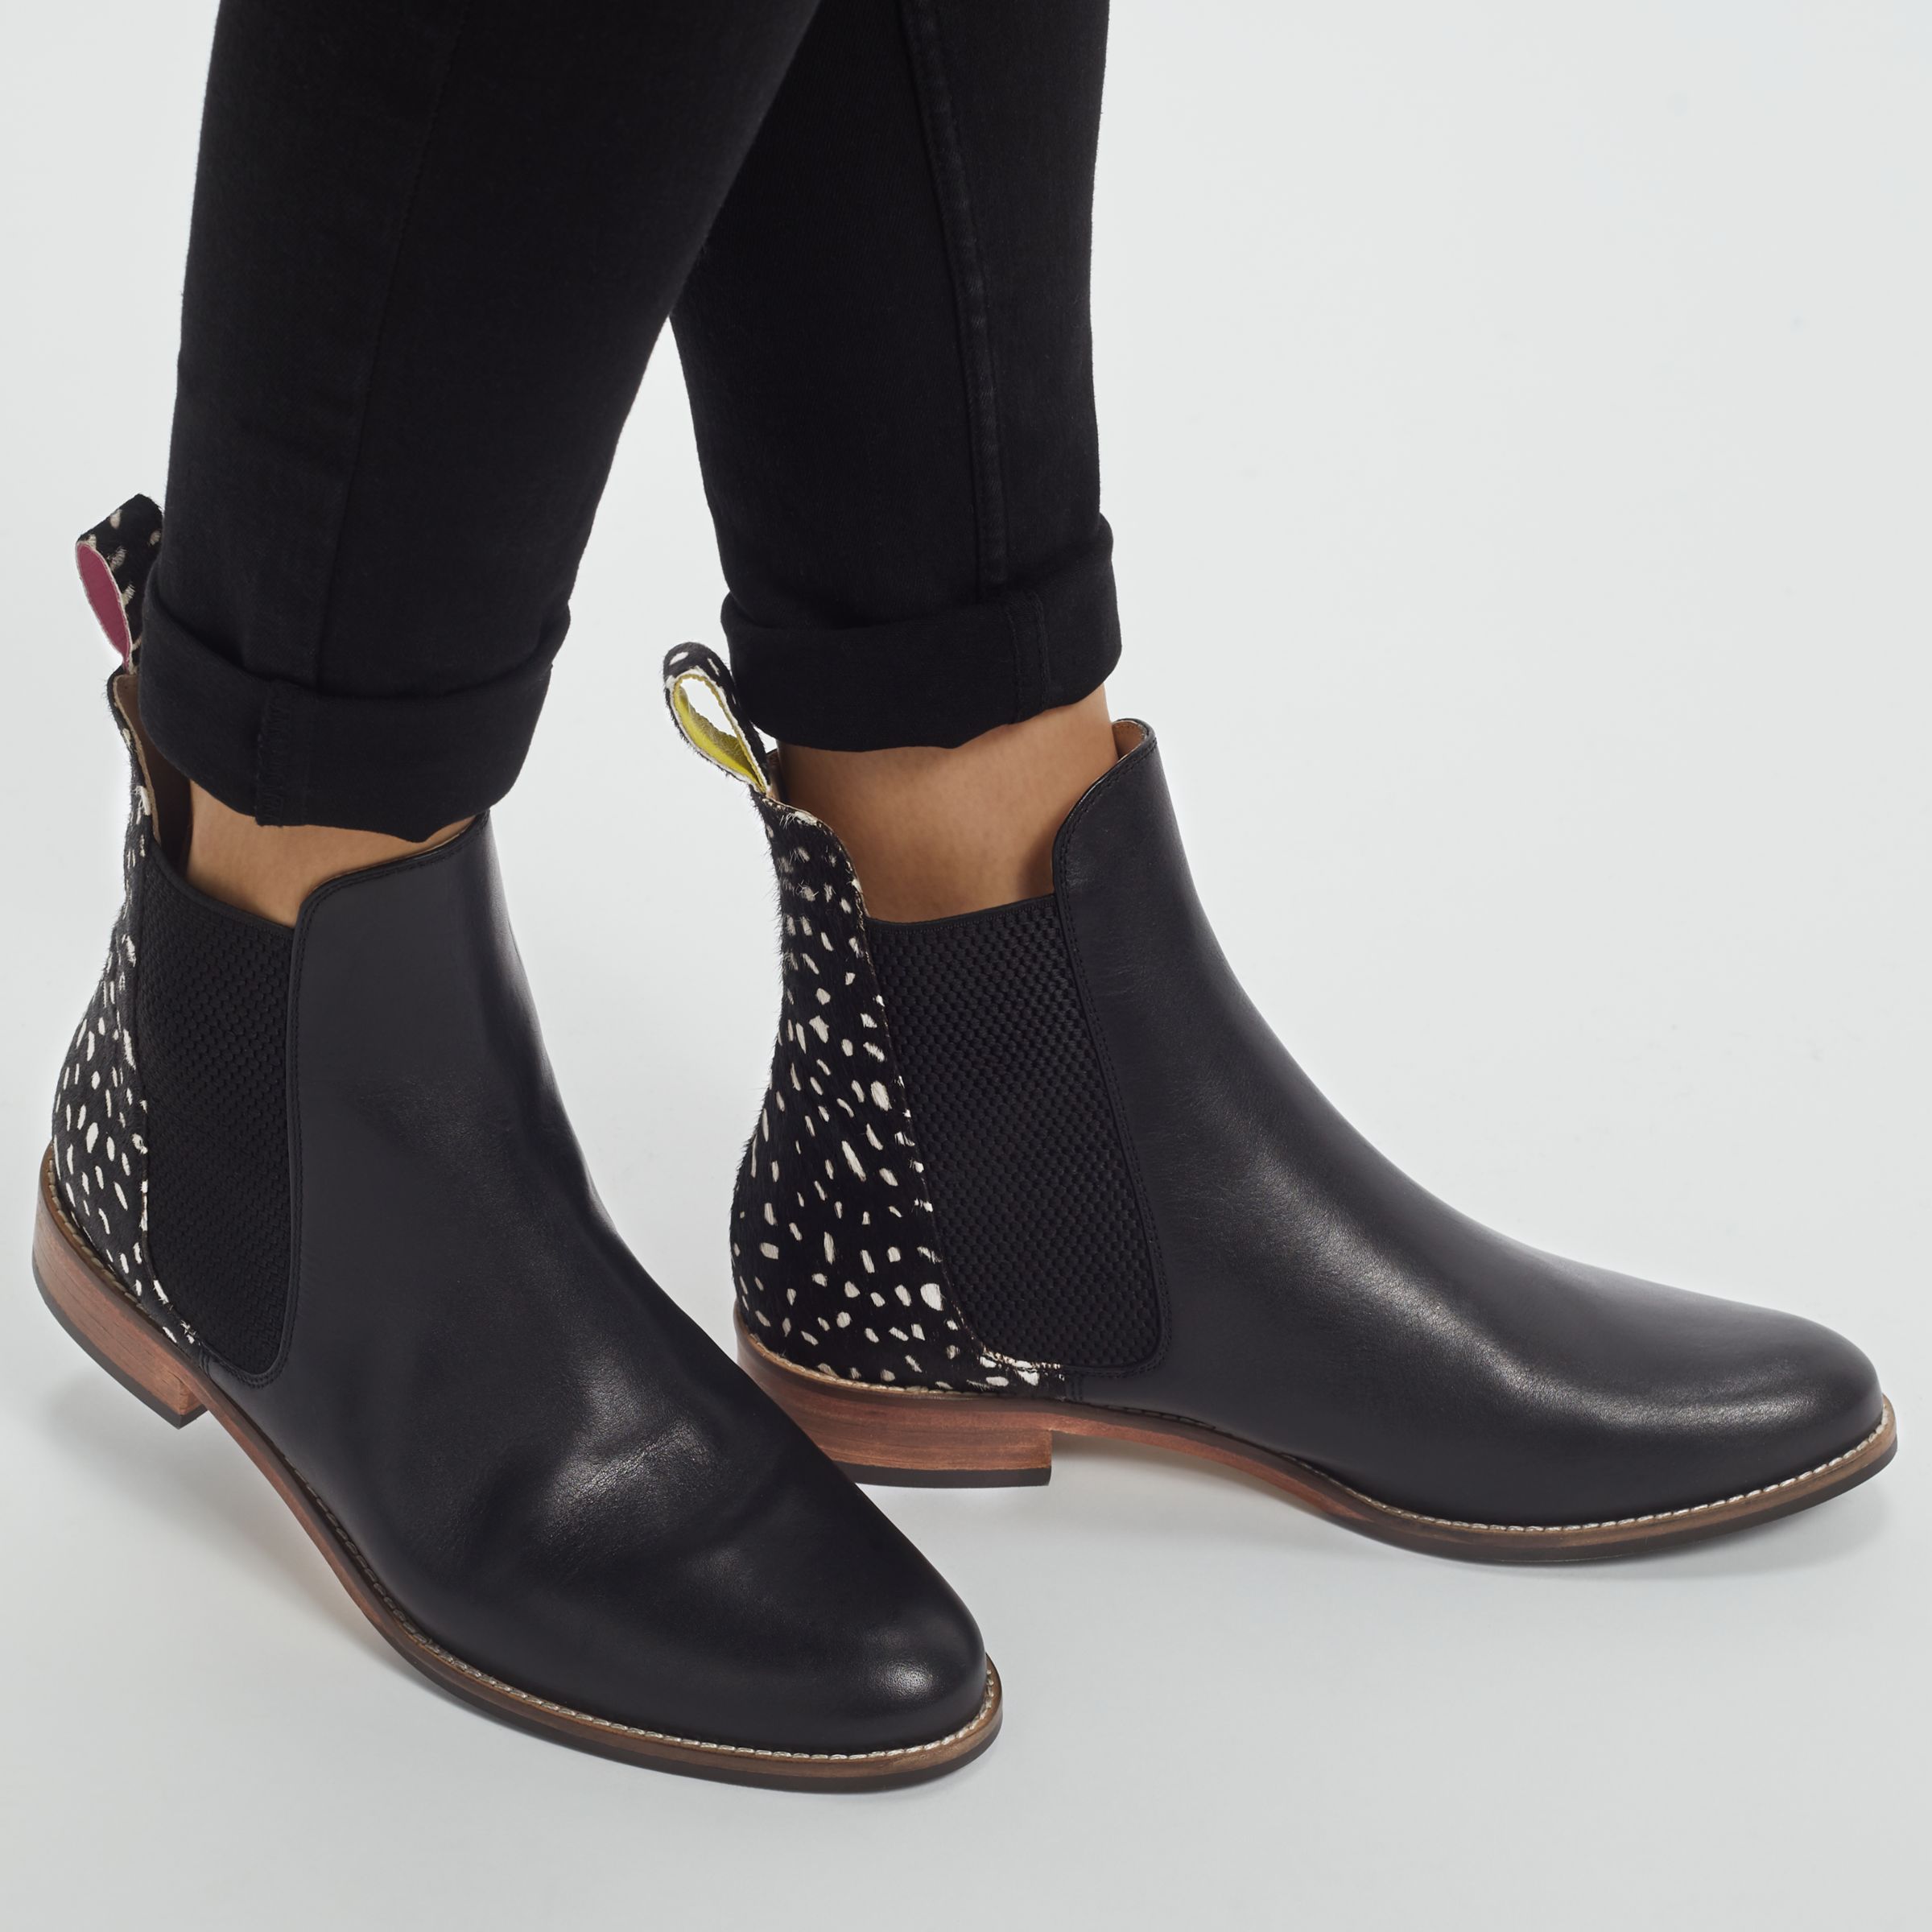 Joules Westbourne Leather Chelsea Boots, Black Spot